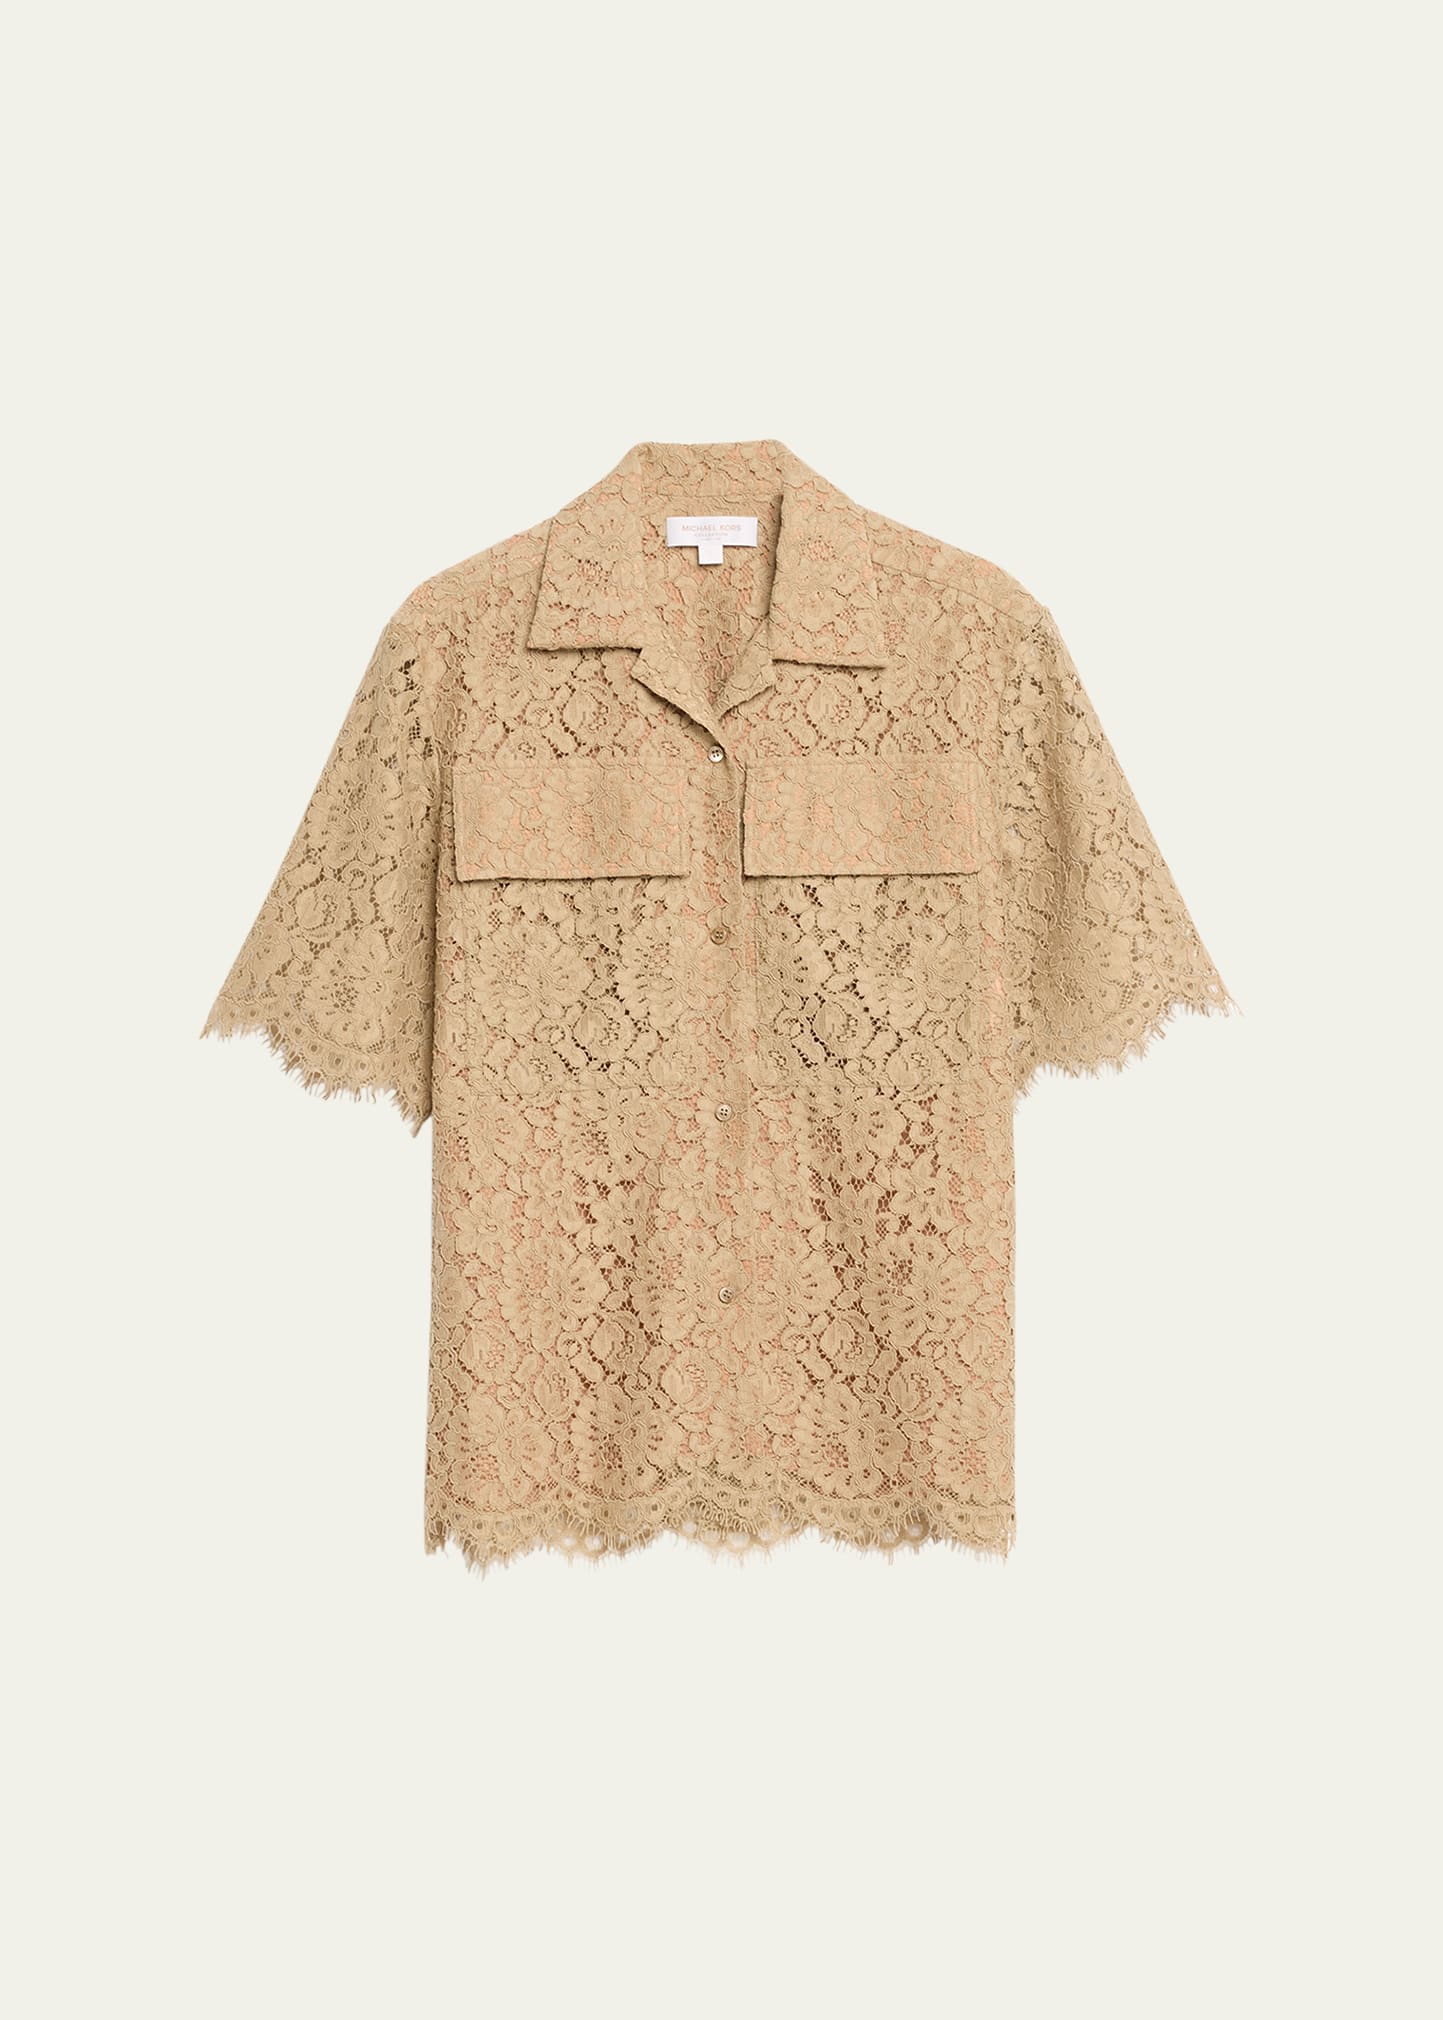 Michael Kors Floral Lace Camp Shirt In Brown